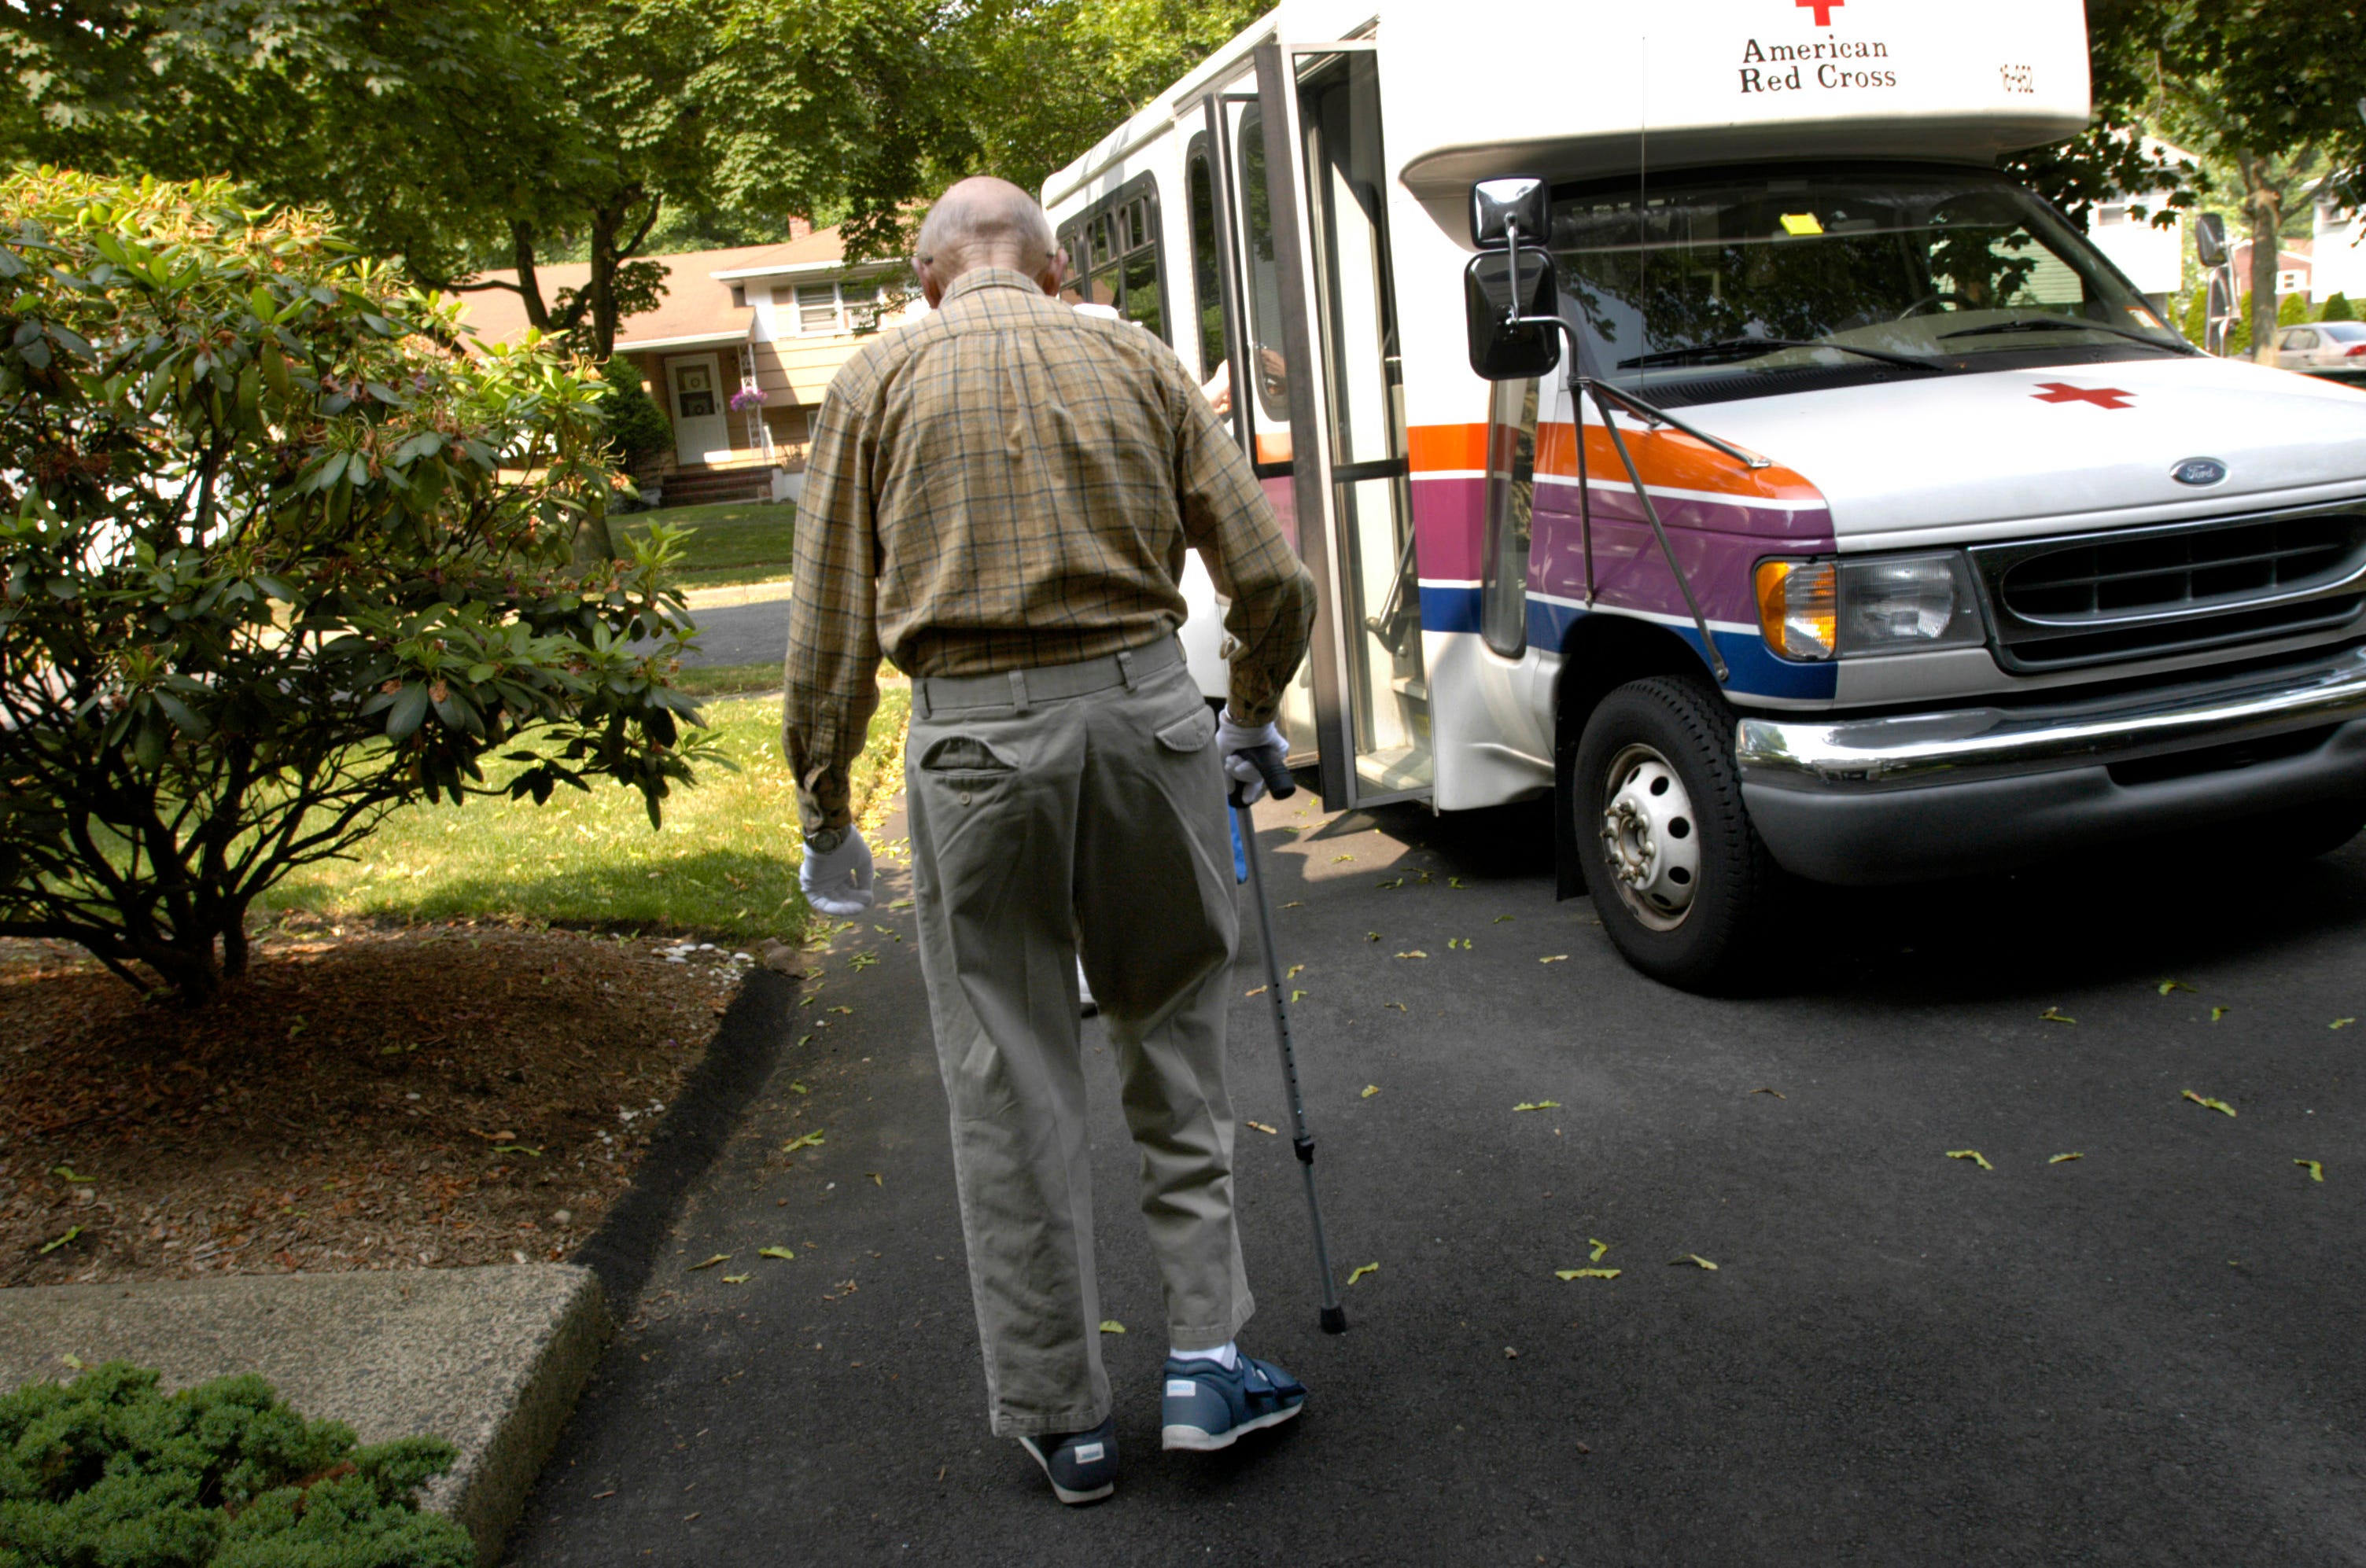 Many New Jersey seniors who give up driving rely on paratransit vans run by the government or non-profits to take them to medical appointments.